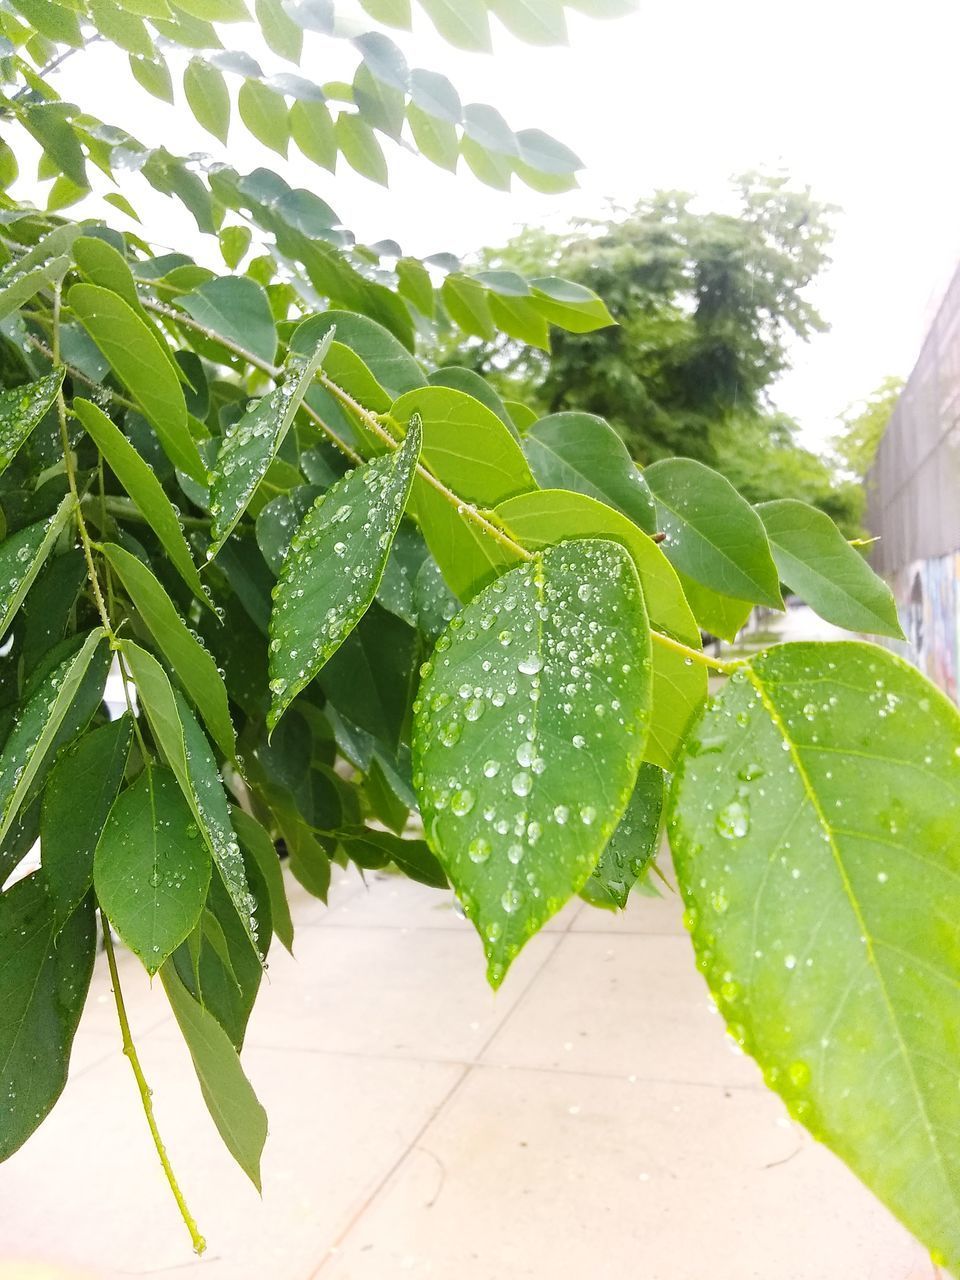 CLOSE-UP OF RAINDROPS ON LEAVES